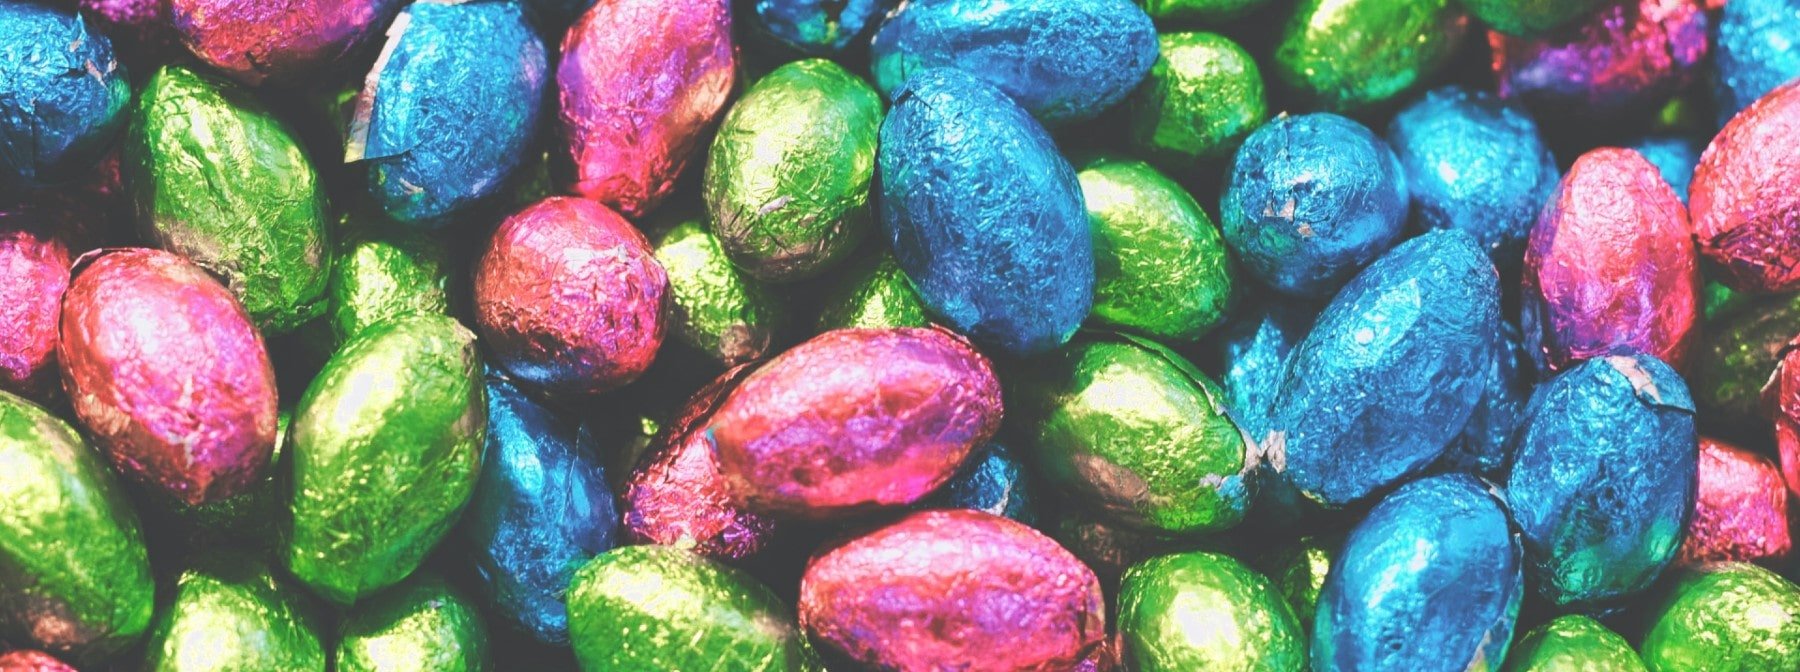 Say Goodbye To Food Guilt This Easter